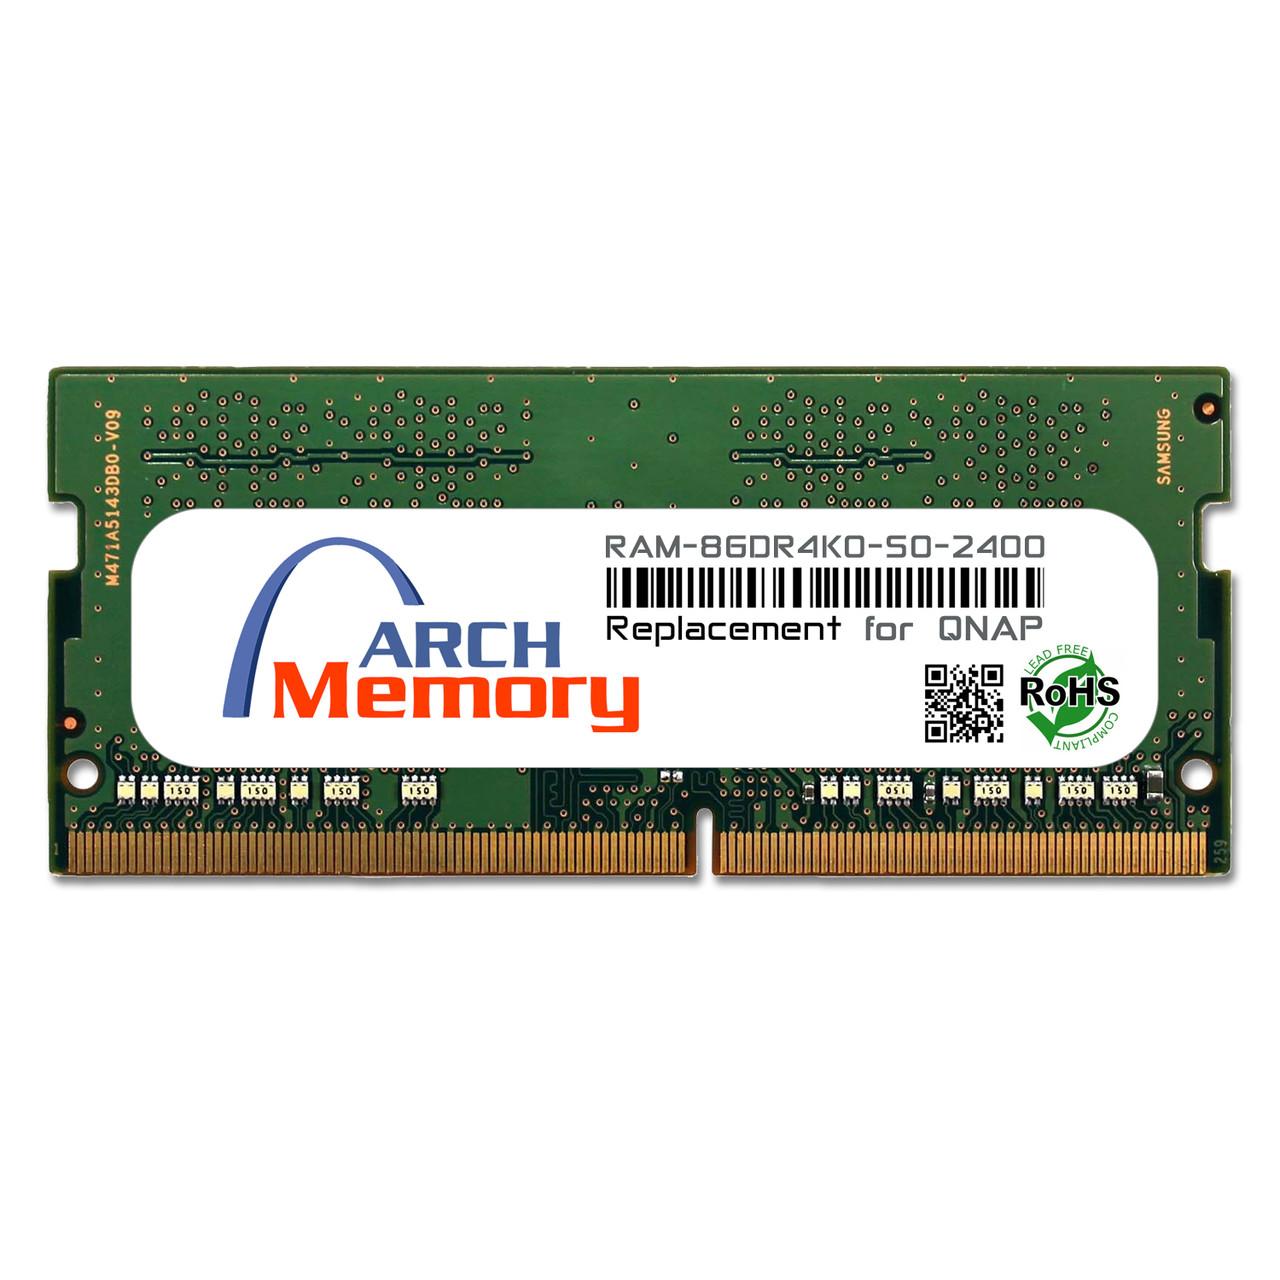 Arch Memory Replacement for Qnap RAM-8GDR4K0-SO-2400 8 GB DDR4-2400 PC4-19200 260-Pin So-dimm RAM K0 Version